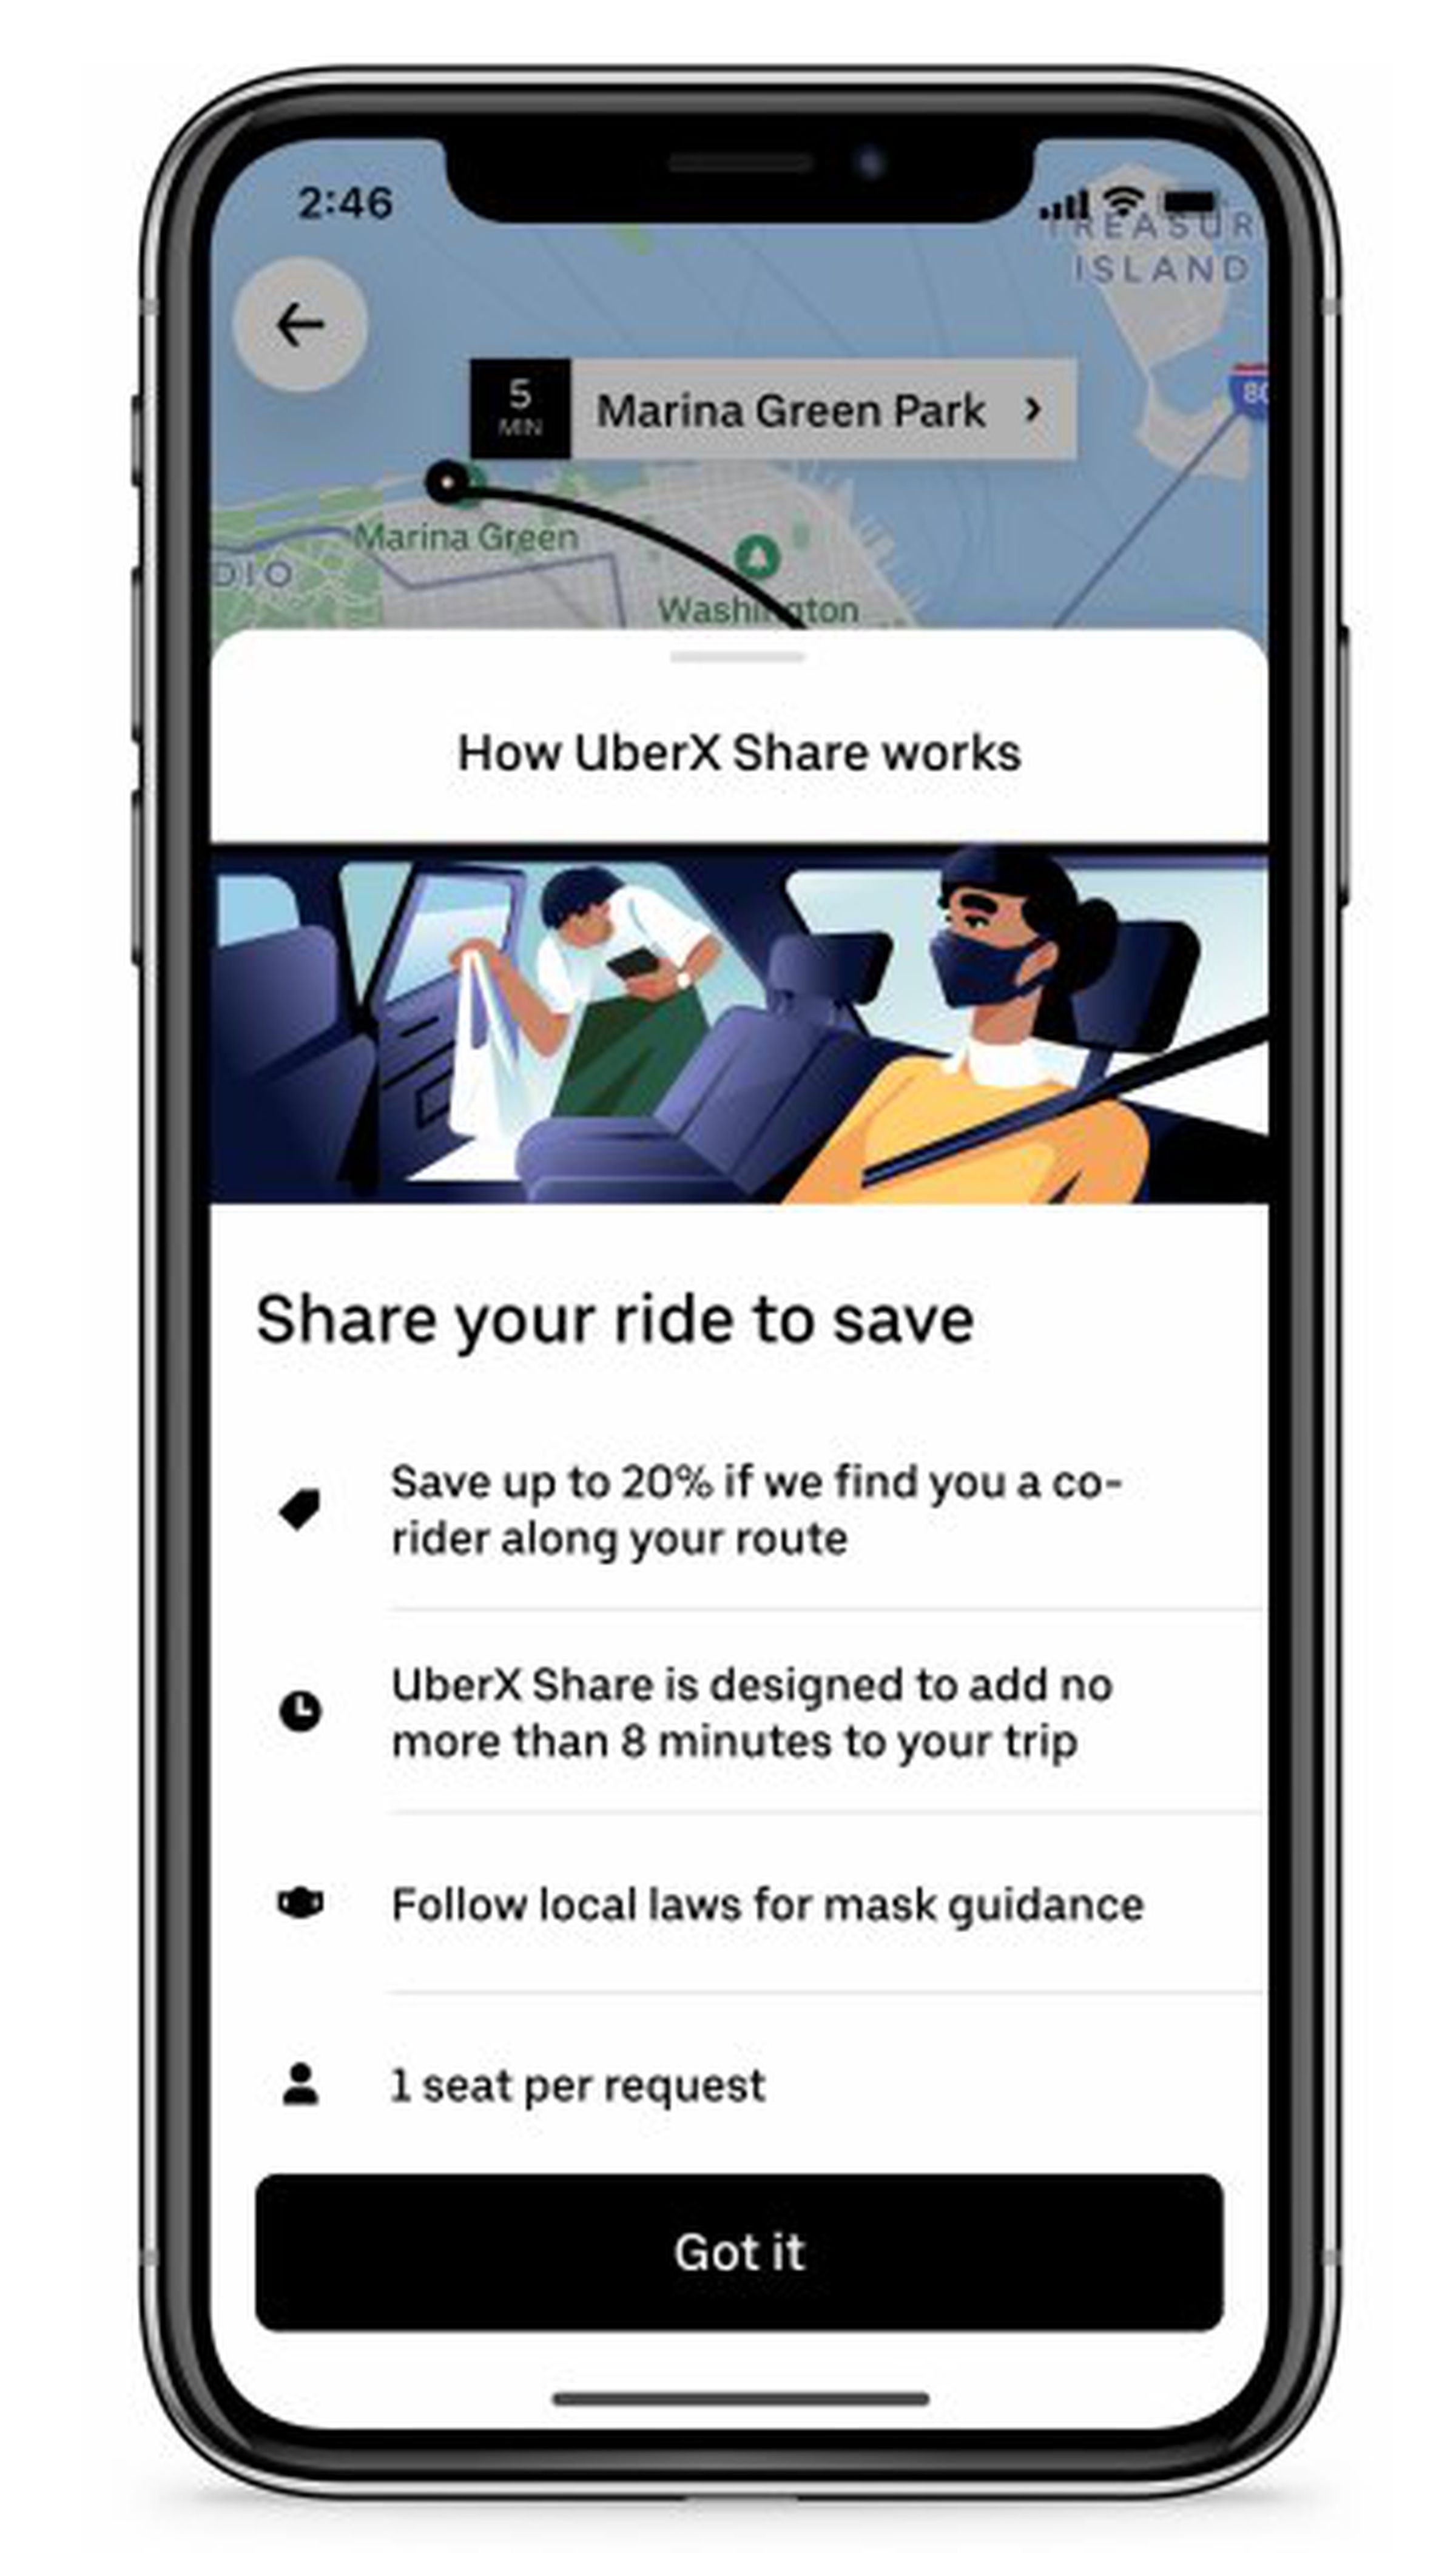 UberX Share information in the Uber app detailing savings, mask guidance, and 1 seat per rider rule